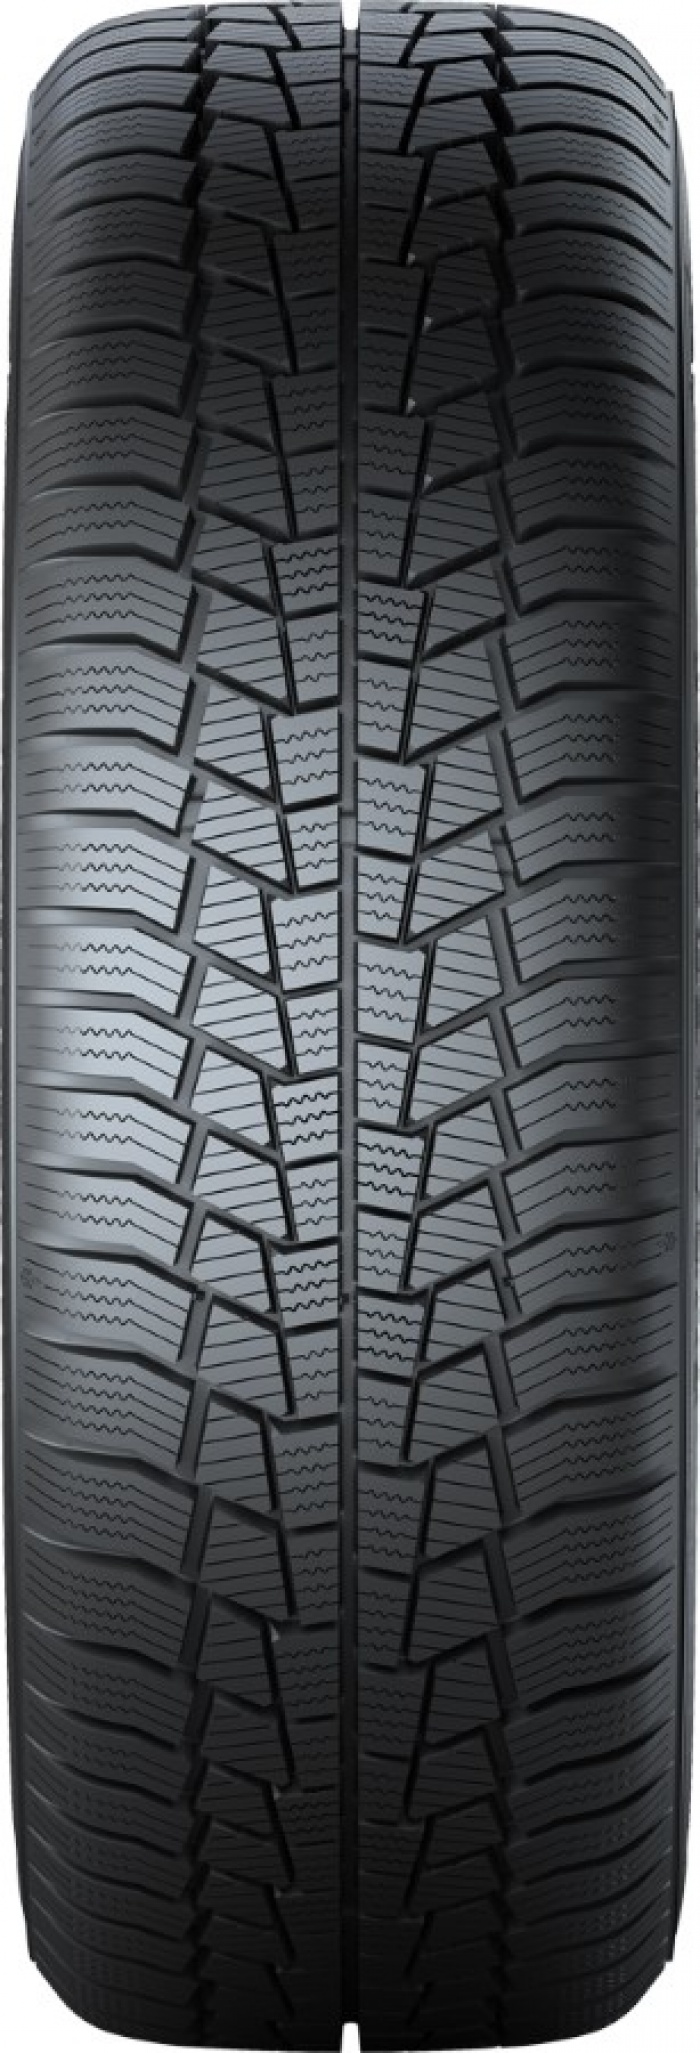 Gislaved Euro Frost 6 205/65 R15 94T  не шип